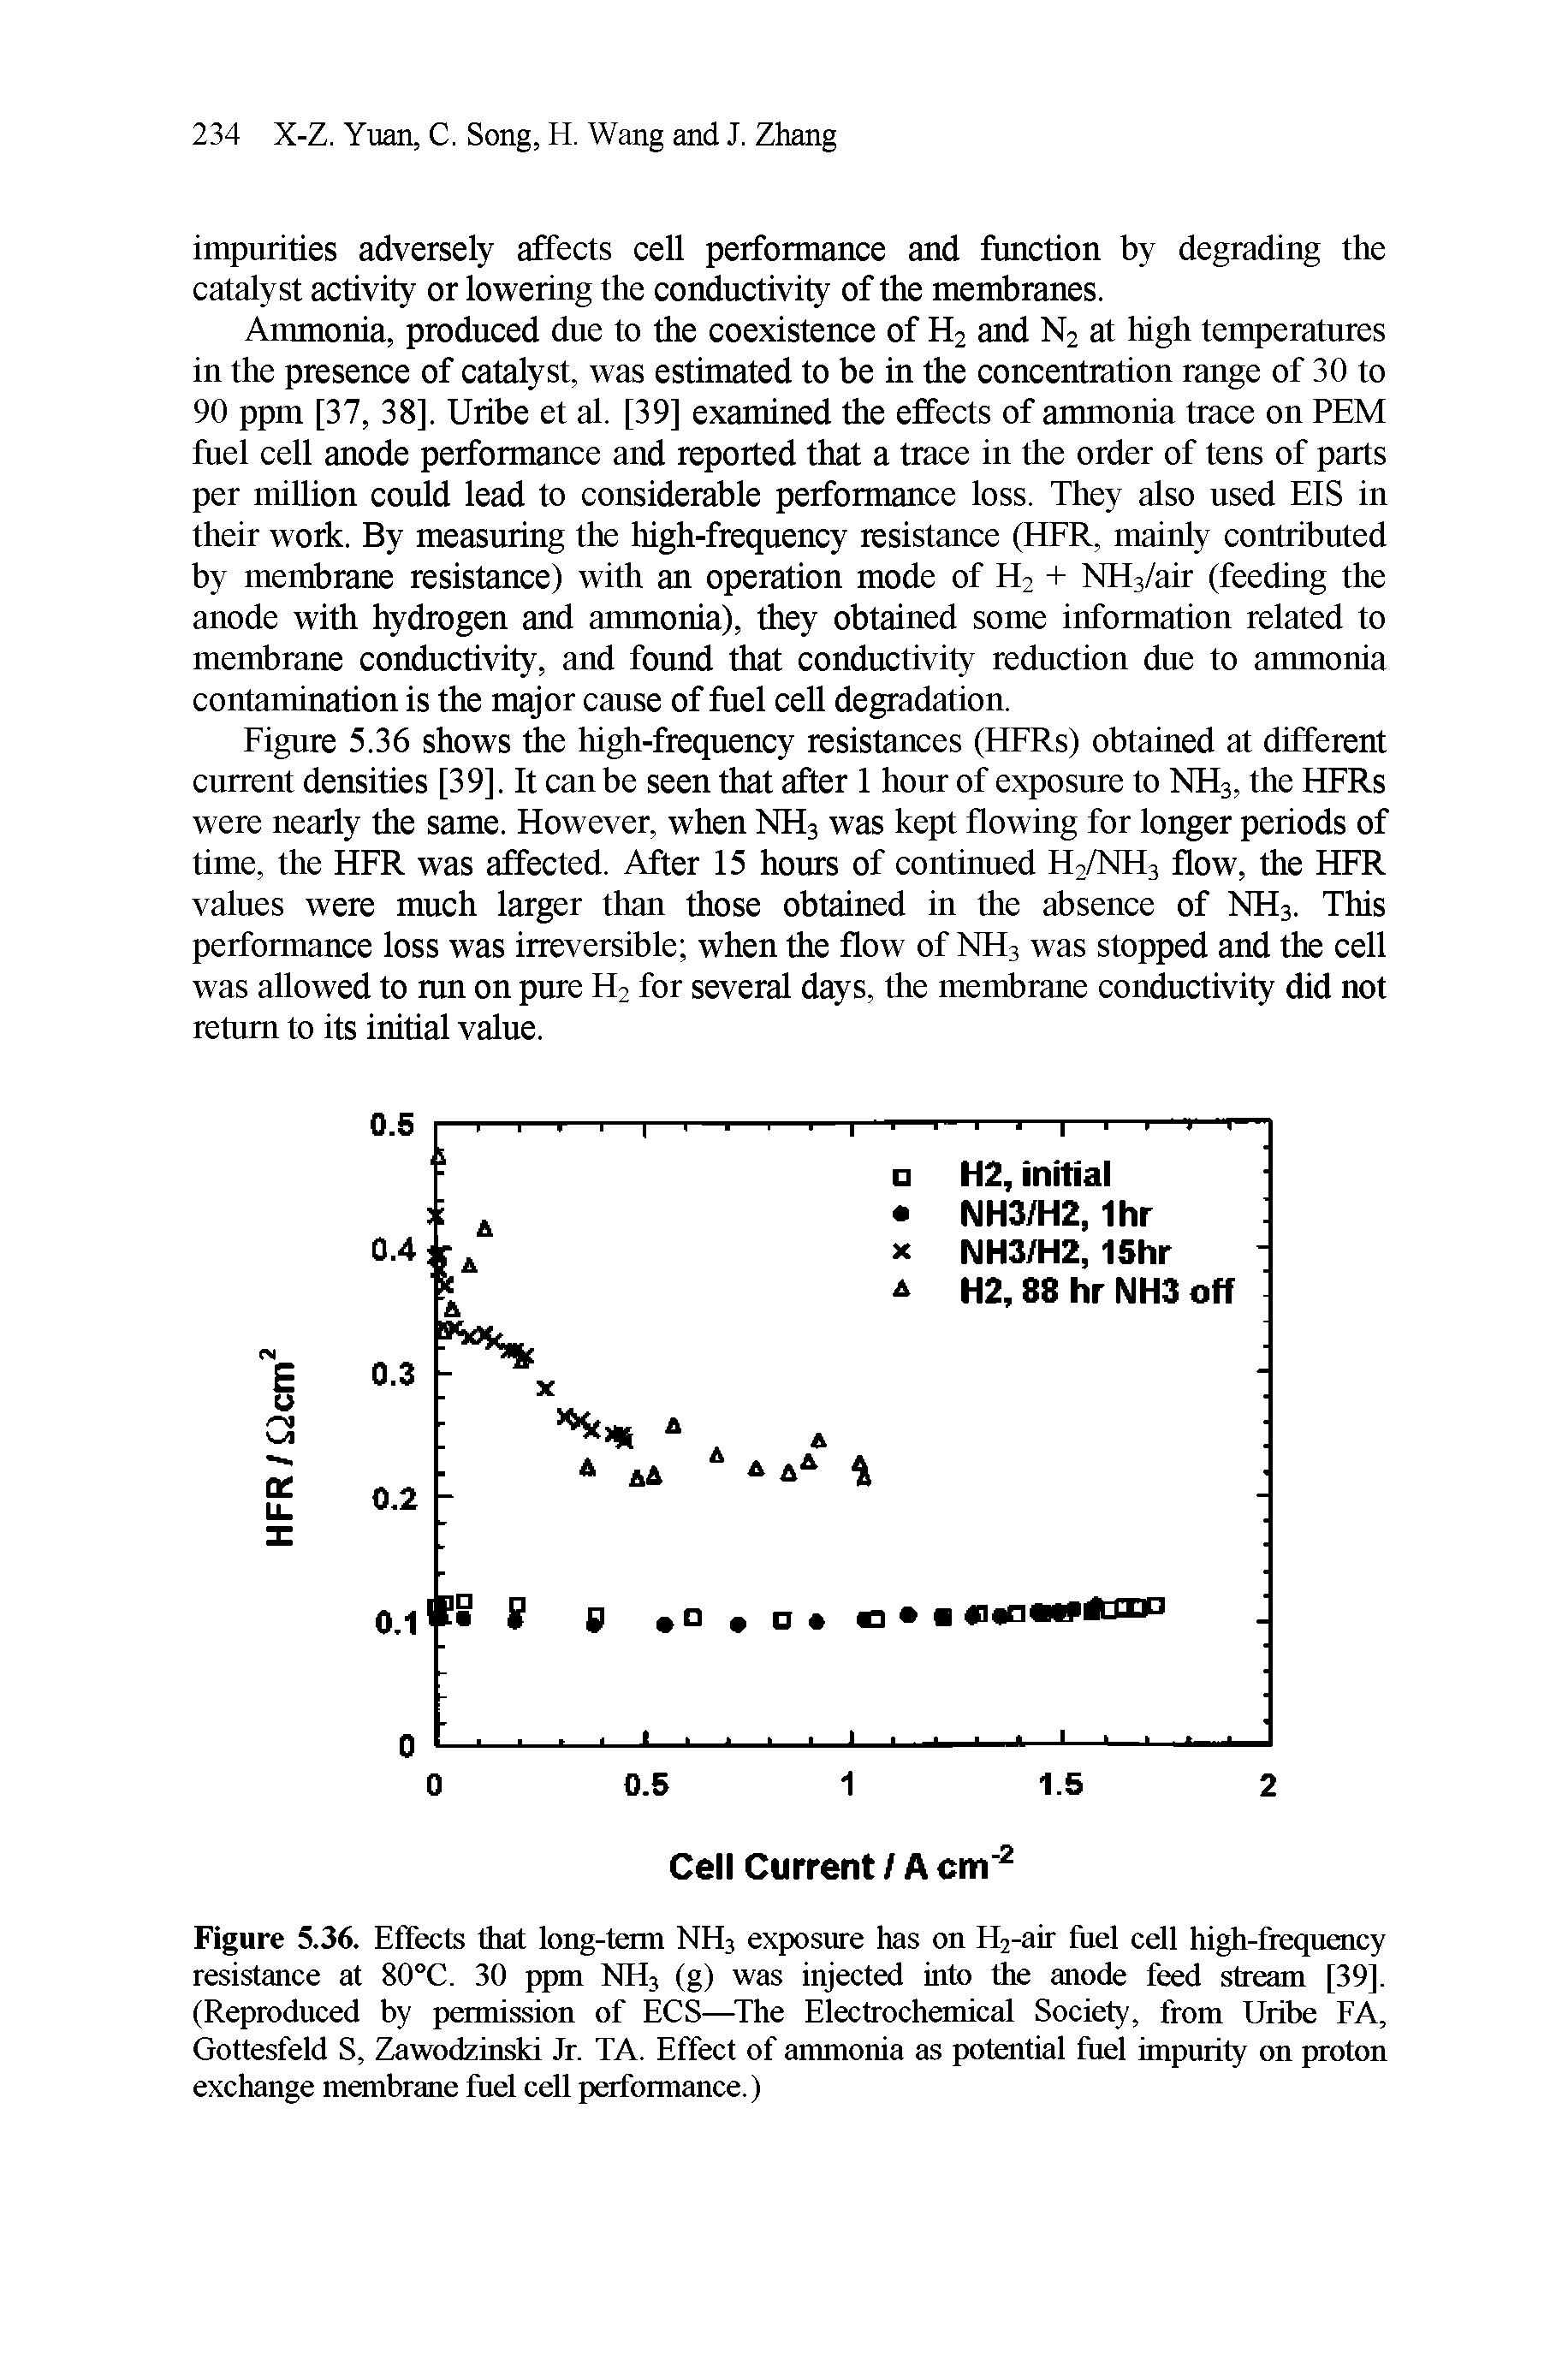 Figure 5.36. Effects that long-term NH3 exposure has on H2-air fuel cell high-frequency resistance at 80°C. 30 ppm NH3 (g) was injected into the anode feed stream [39], (Reproduced by permission of ECS—The Electrochemical Society, from Uribe FA, Gottesfeld S, Zawodzinski Jr. TA. Effect of ammonia as potential fuel impurity on proton exchange membrane fuel cell performance.)...